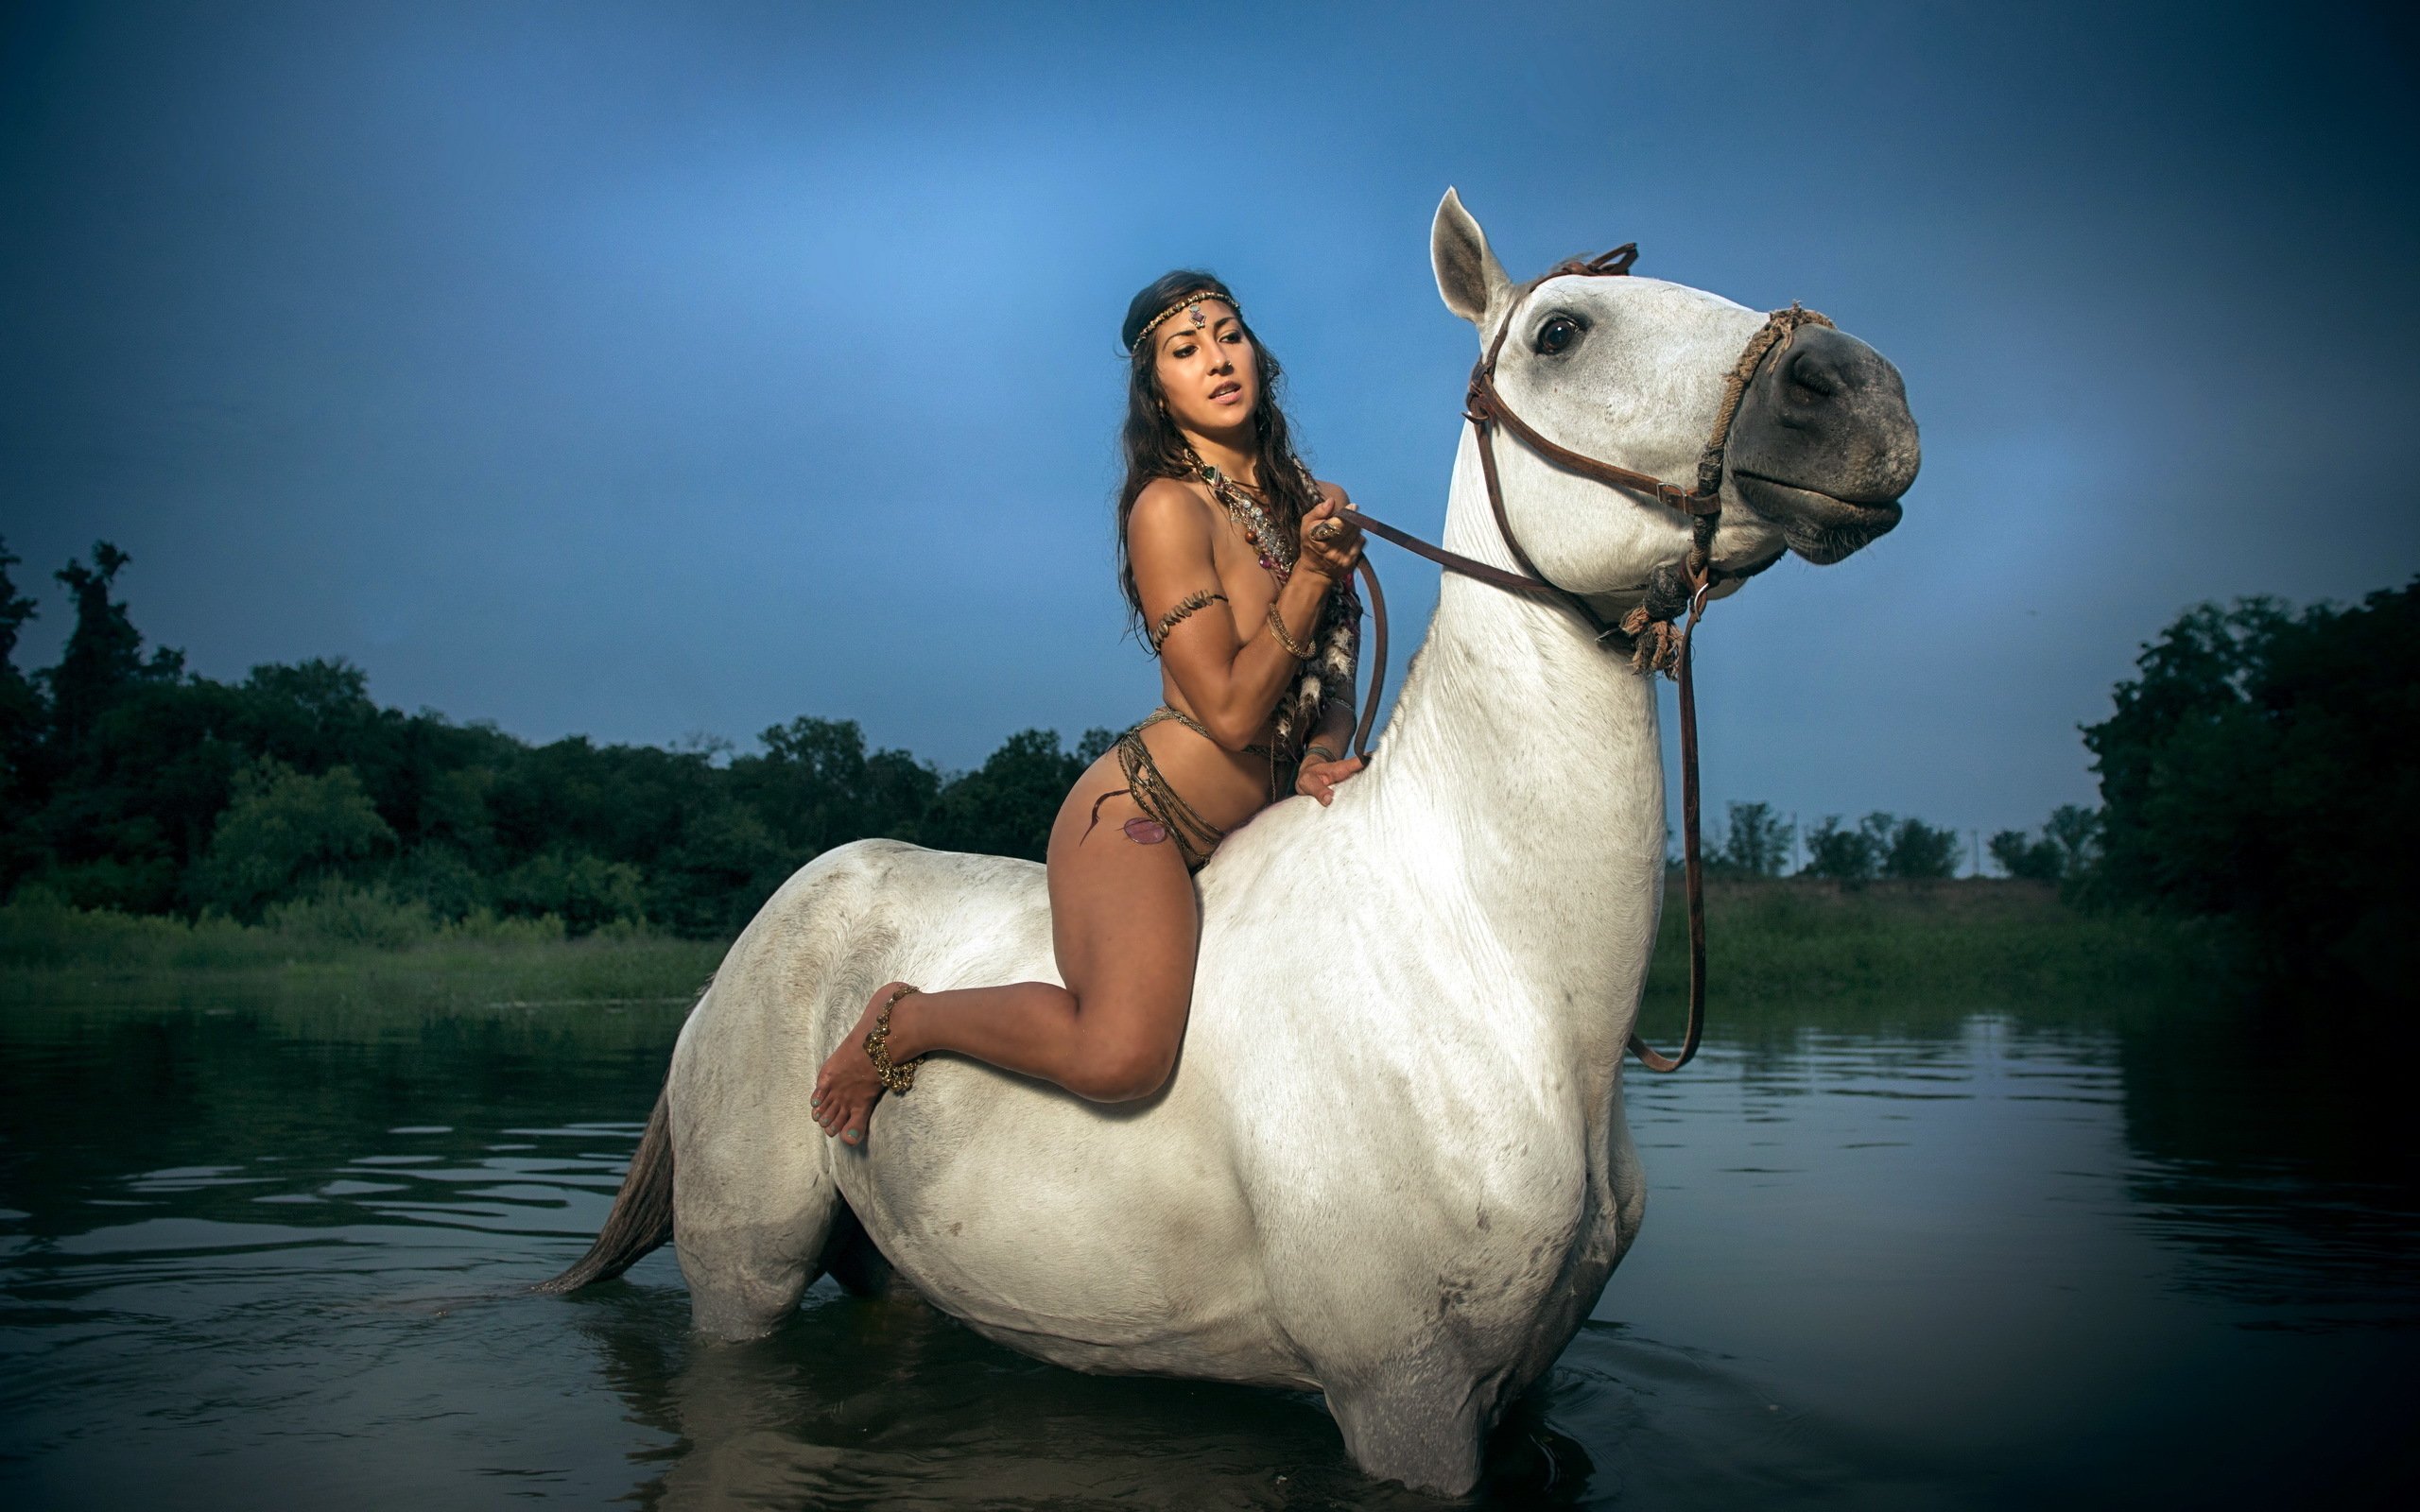 Argentinian girl riding